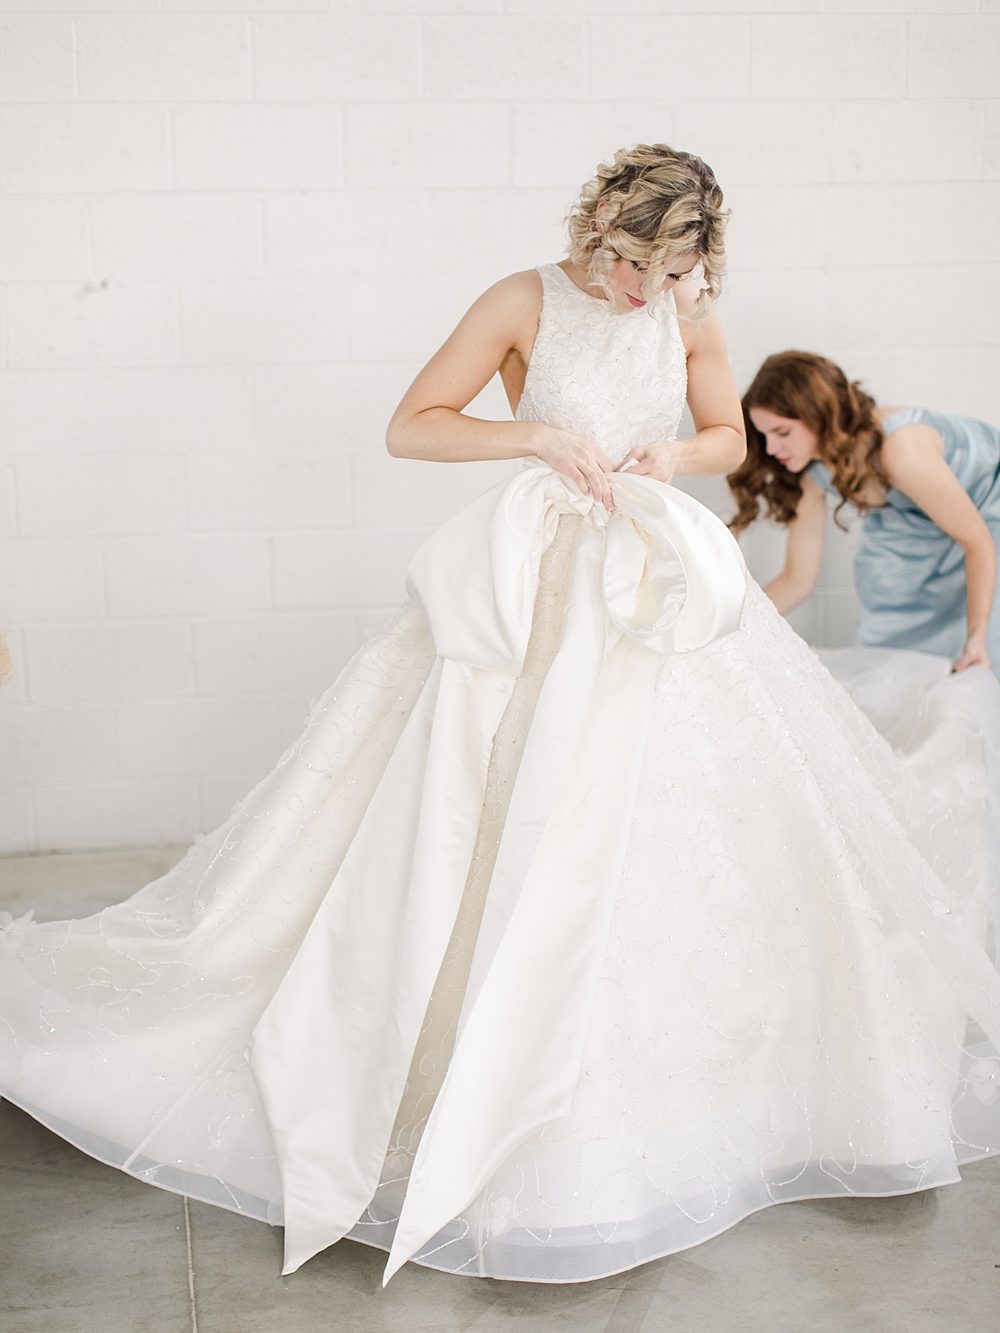 Designing My Own Custom Couture Wedding Gown; custom gown design and alterations; Sarah kolis; michigan wedding seamstress